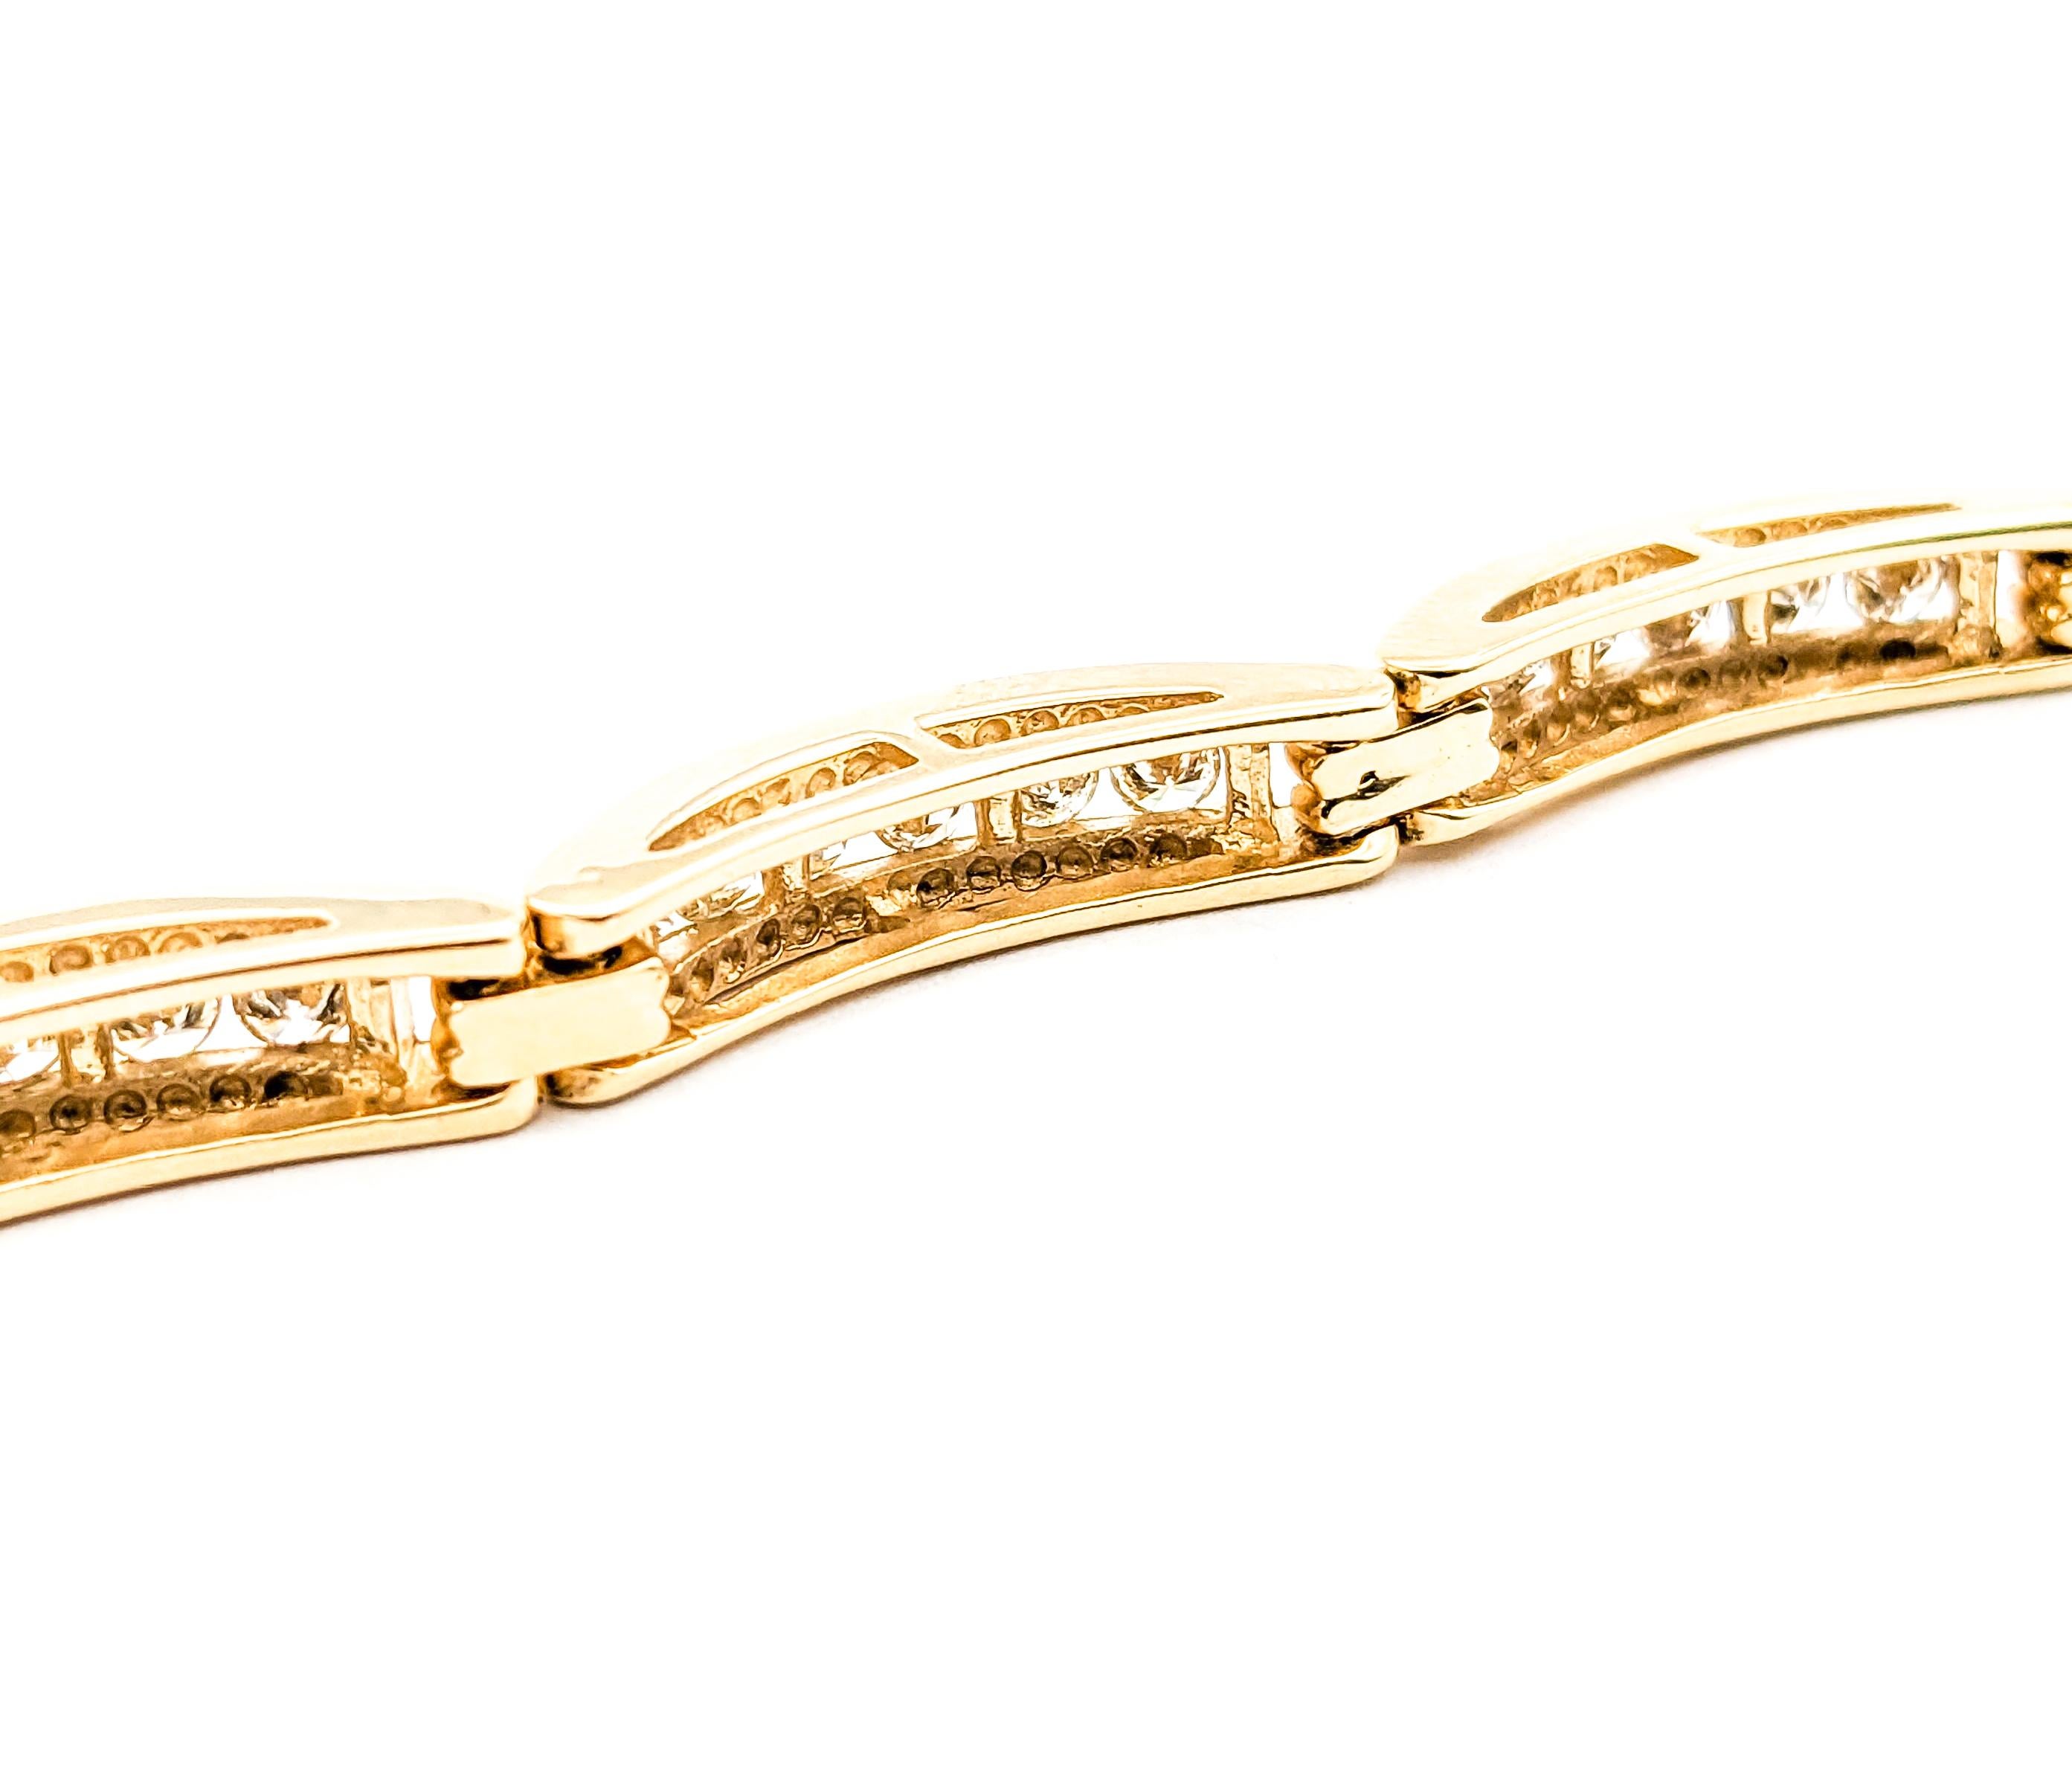 4.0ctw Diamond Tennis Bracelet In Yellow Gold

This tennis bracelet, exquisitely crafted in 14kt yellow gold, is adorned with 4.0 carats of diamonds. The diamonds, featuring SI-I clarity and a near colorless white hue, offer exceptional sparkle and